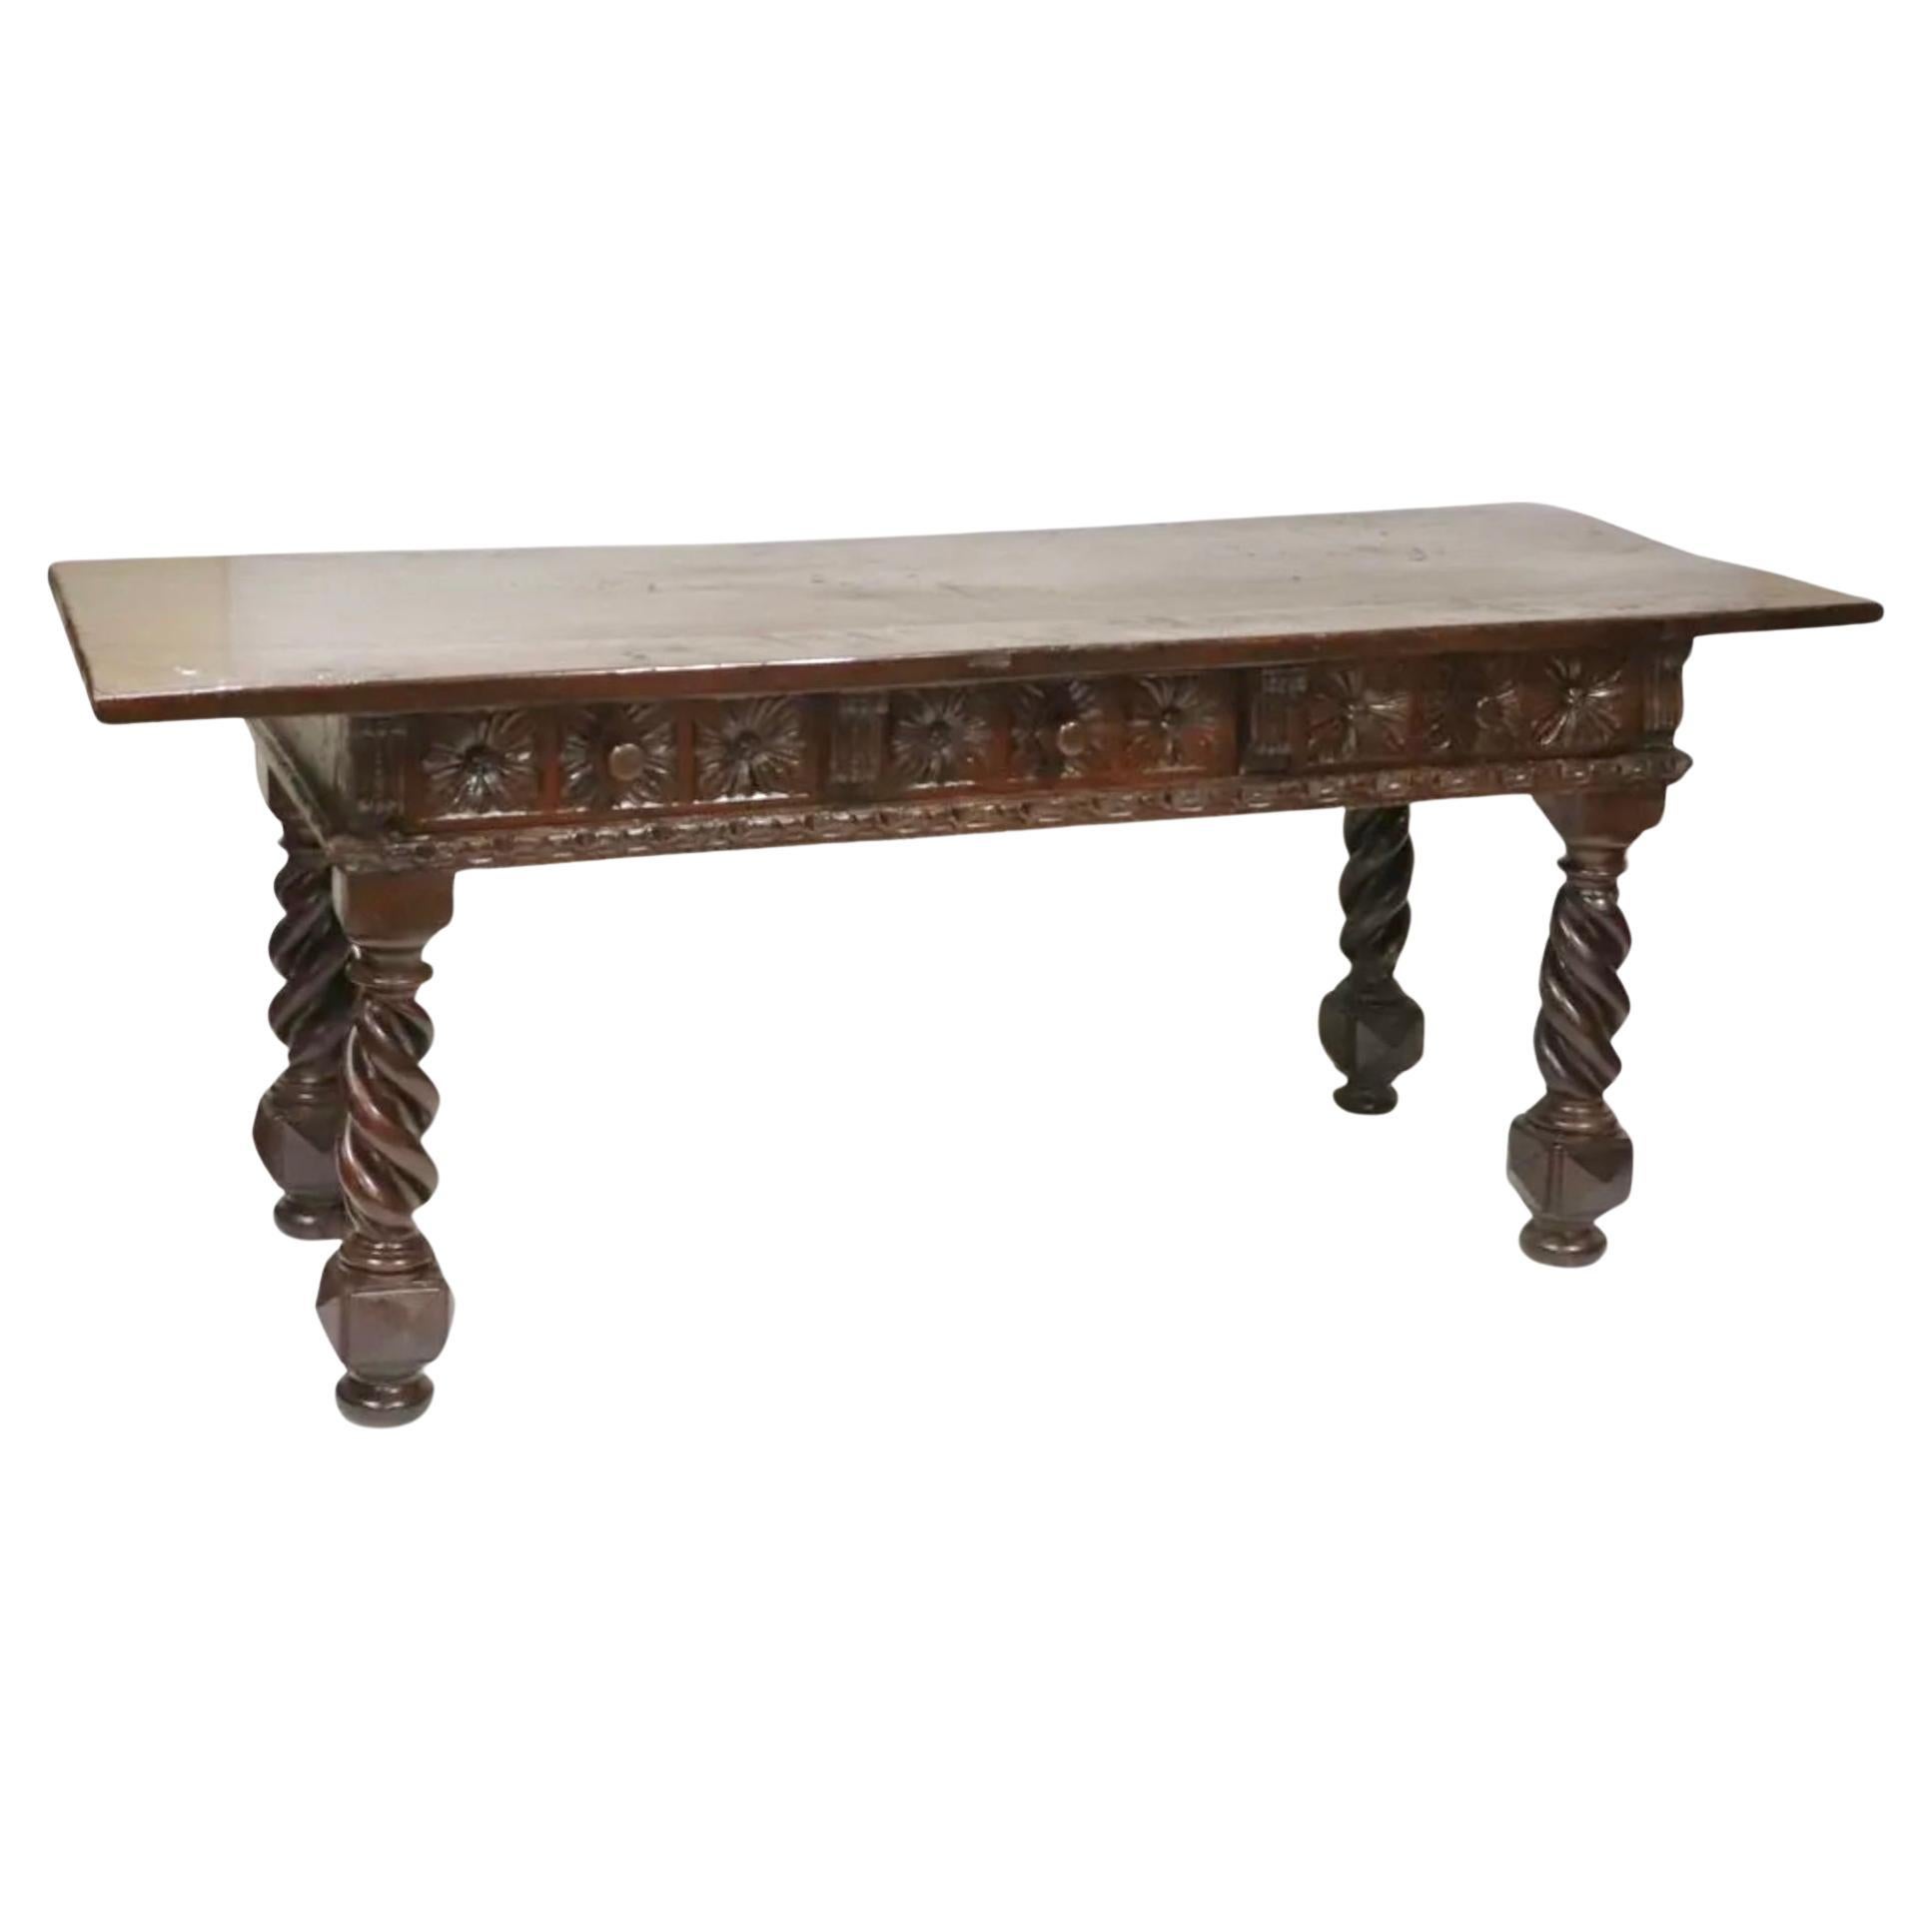 17th Century Italian Carved Walnut Table or Desk In Good Condition For Sale In Bradenton, FL